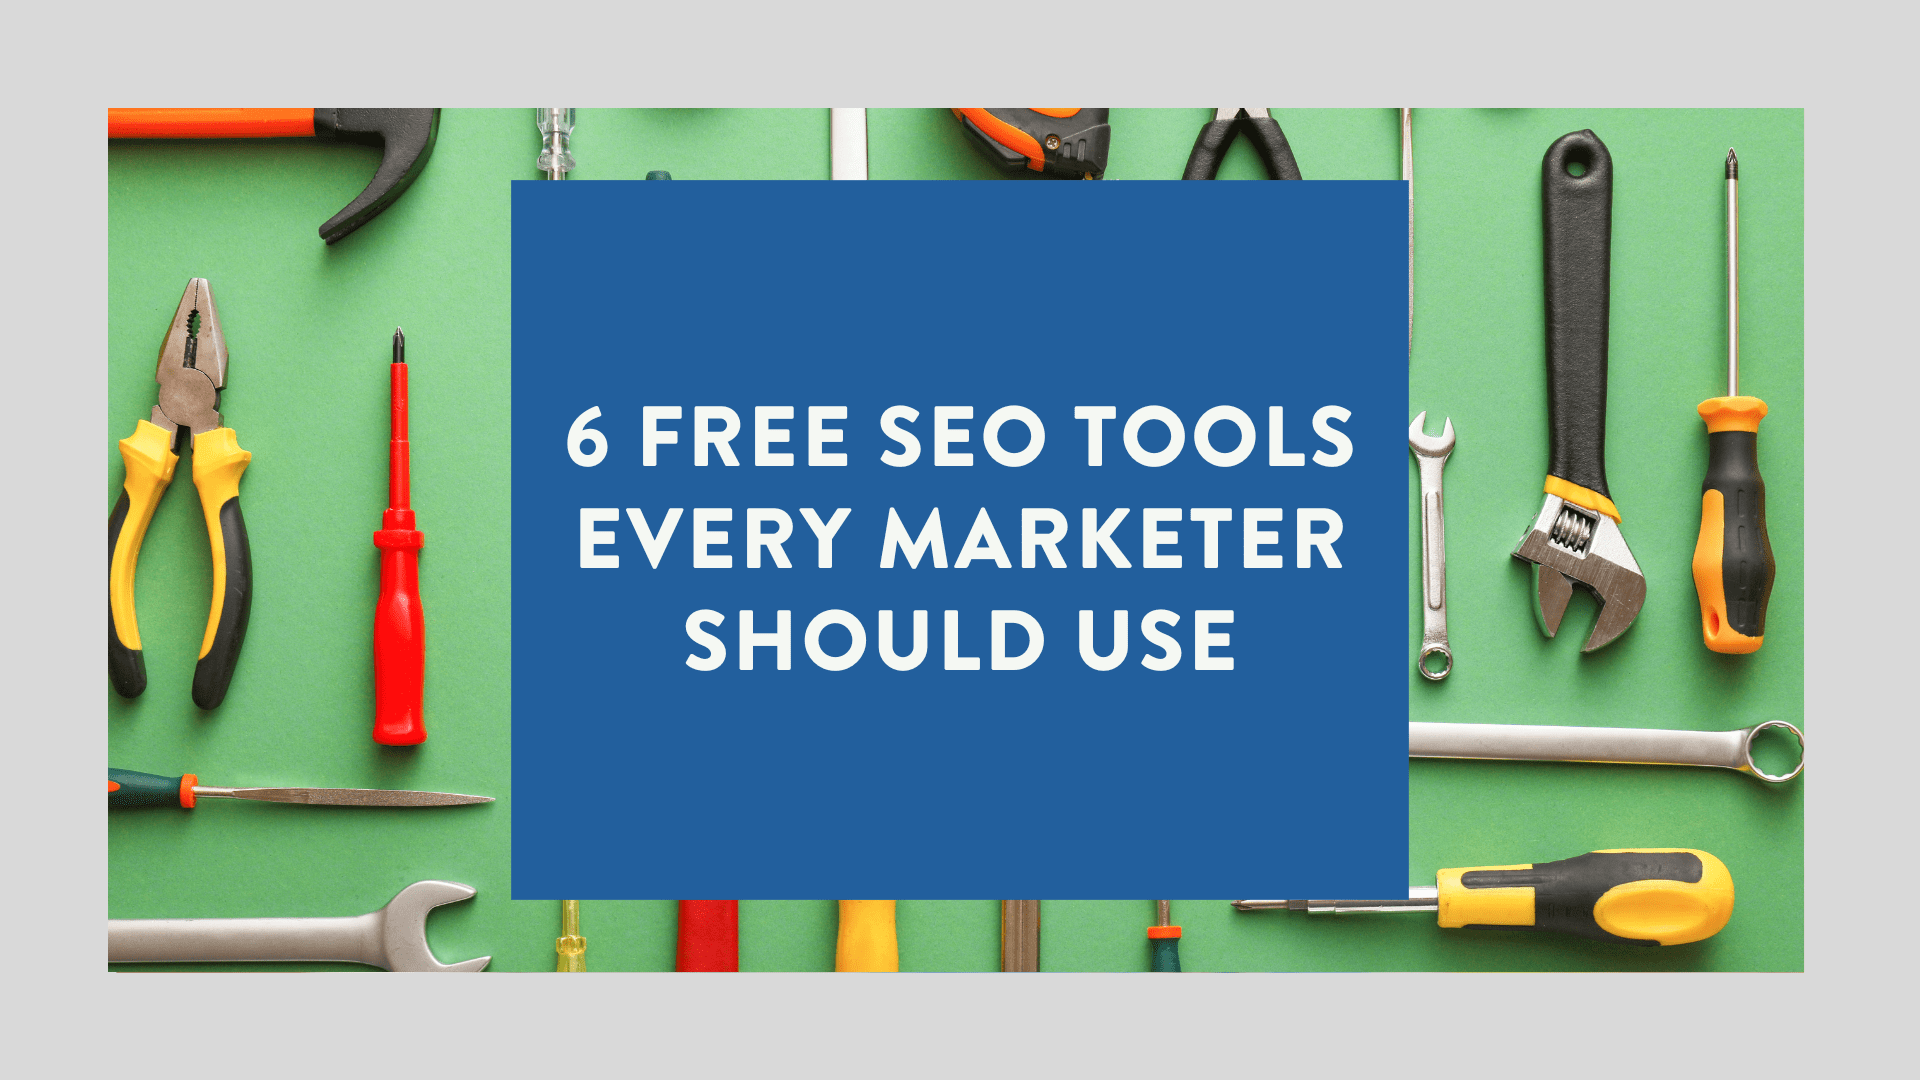 6 Free SEO Tools Every Marketer Should Use